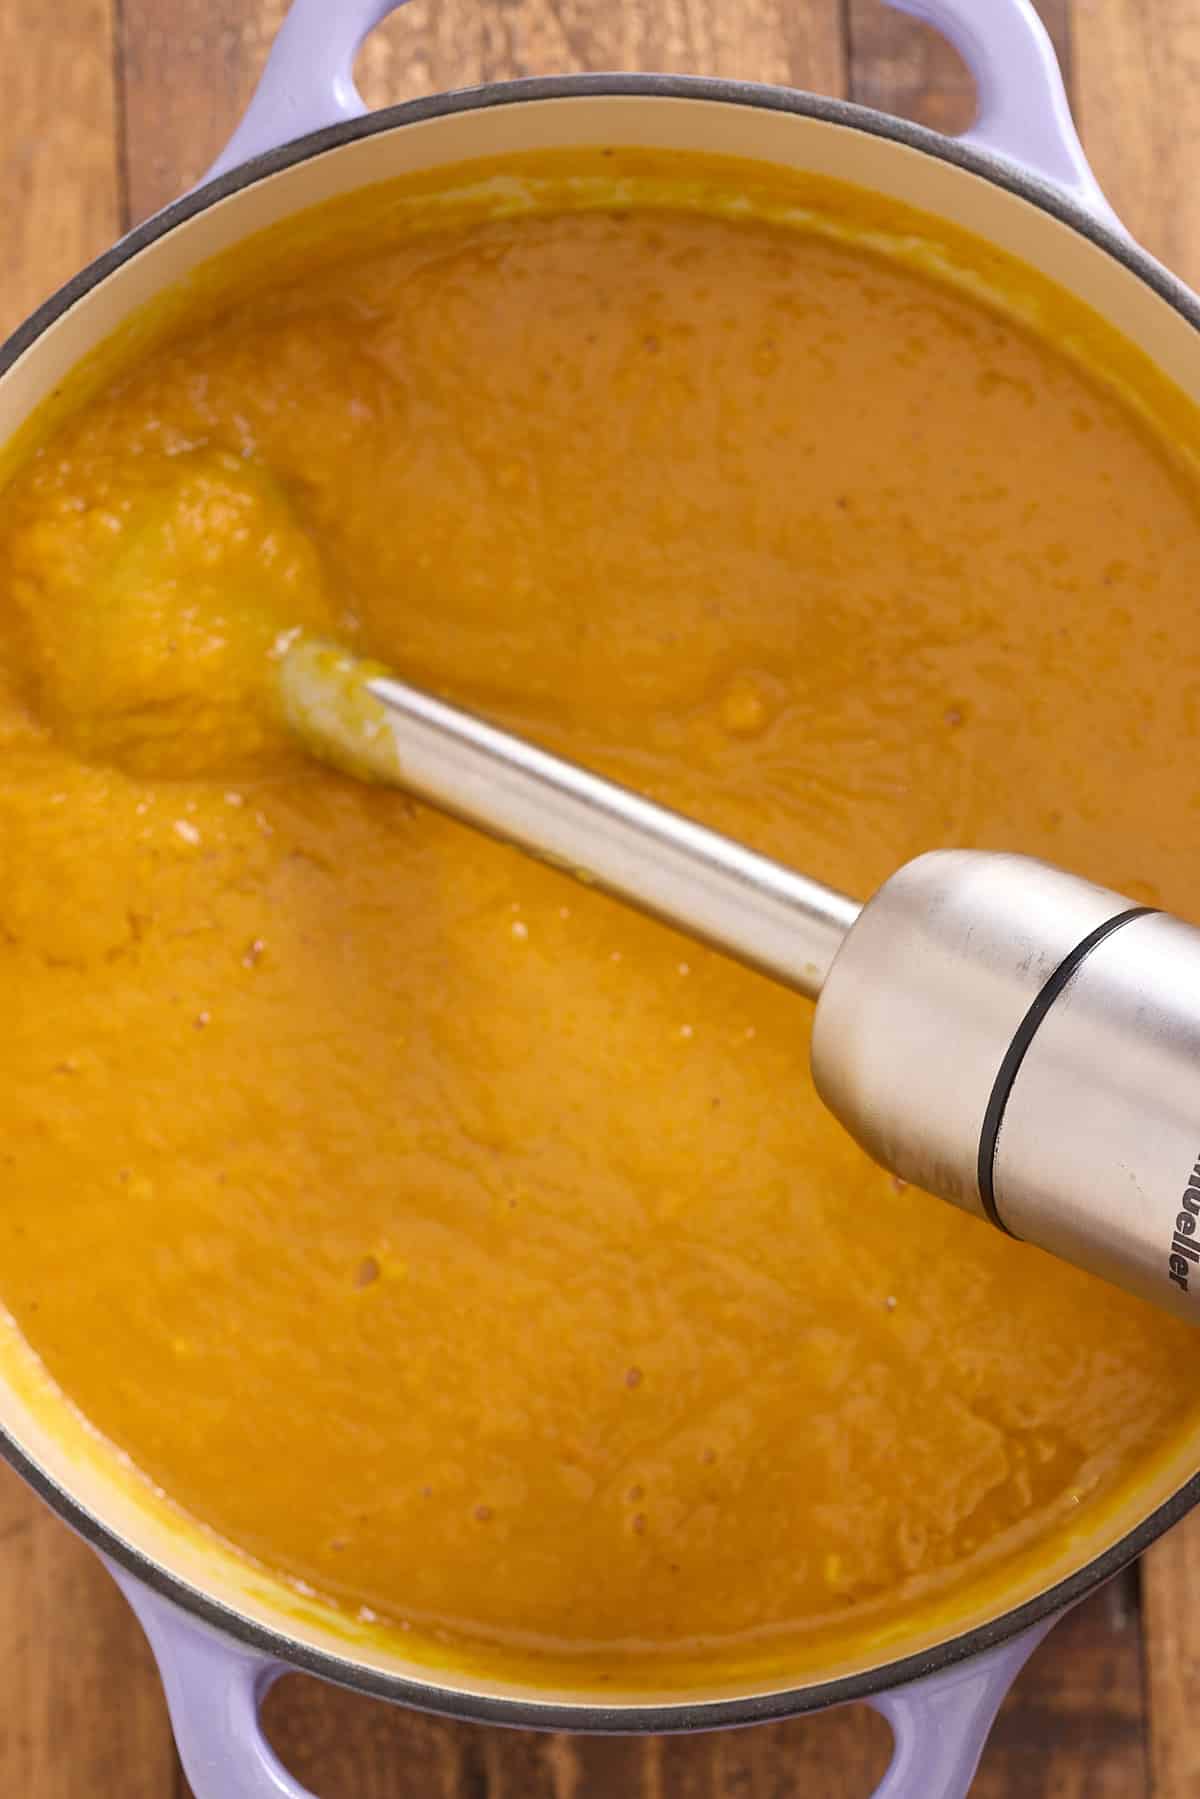 Dutch oven of sweet potato soup being blended using a stick blender